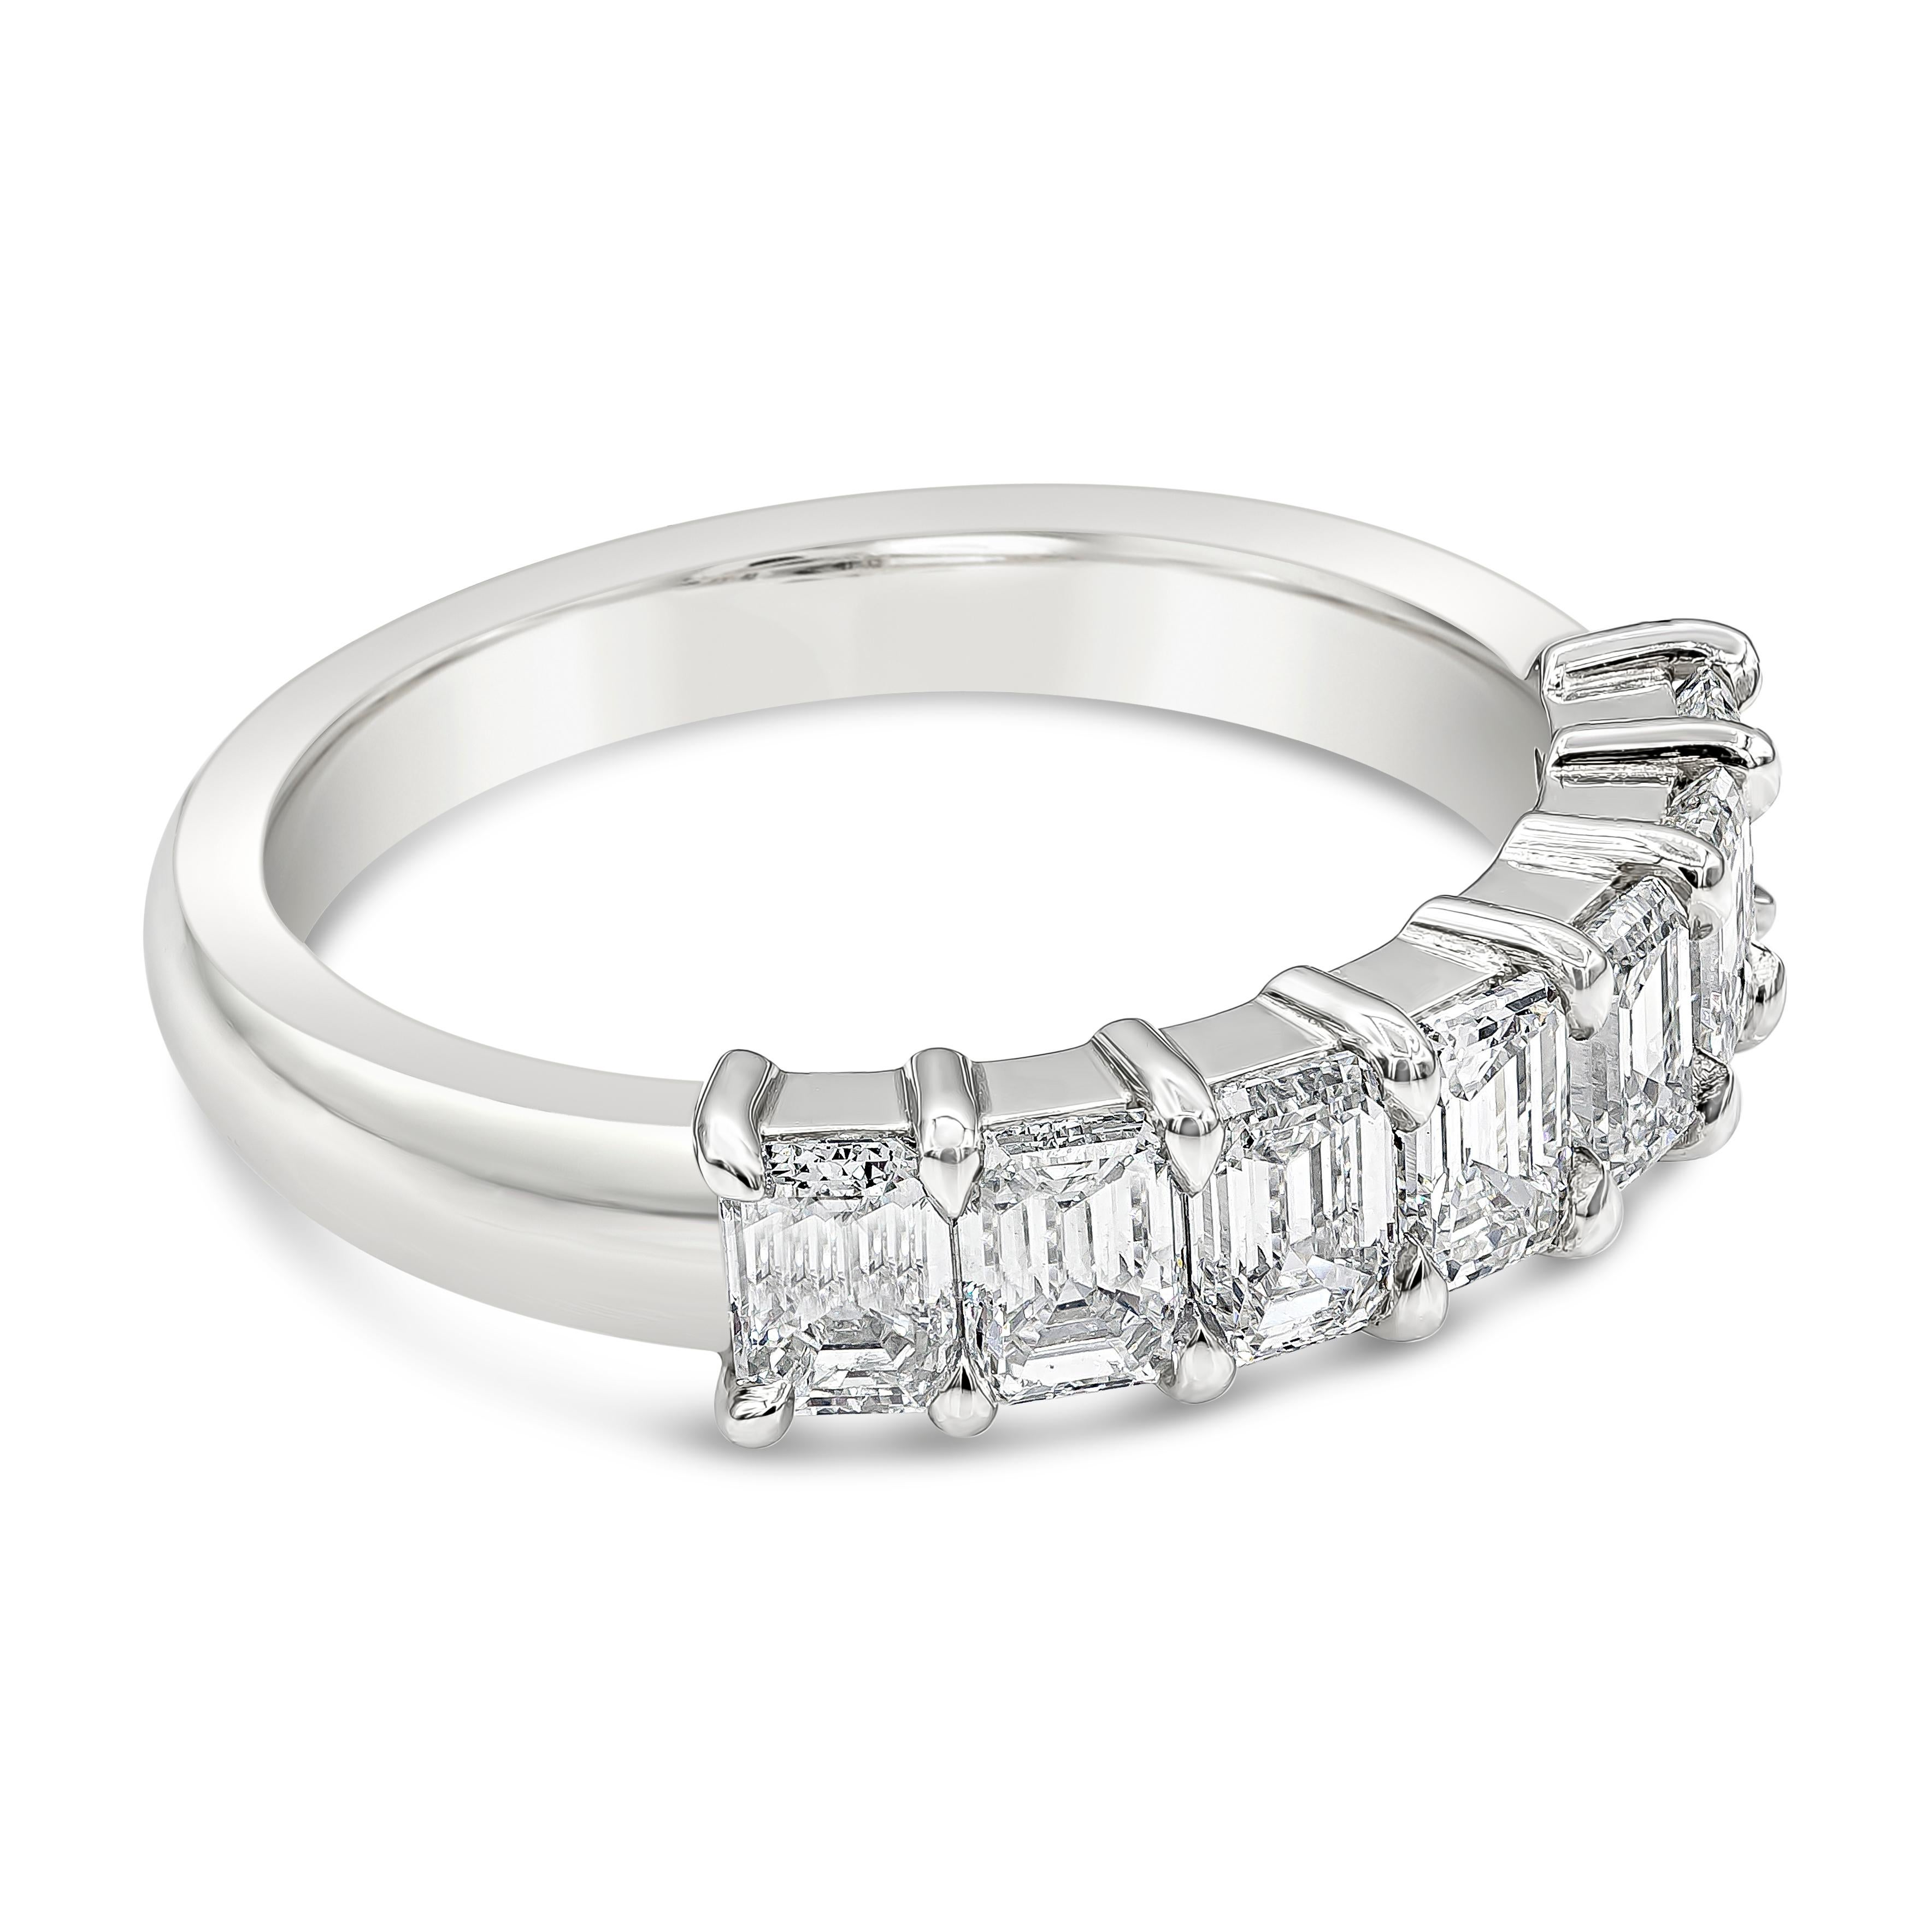 A subtle and elegant wedding band style showcasing seven emerald cut diamonds, set in a closed-gallery mounting made in polished platinum. Diamonds weigh 1.47 carats total and are approximately G-H color, VVS-VS clarity. Size 6 US.

Style available